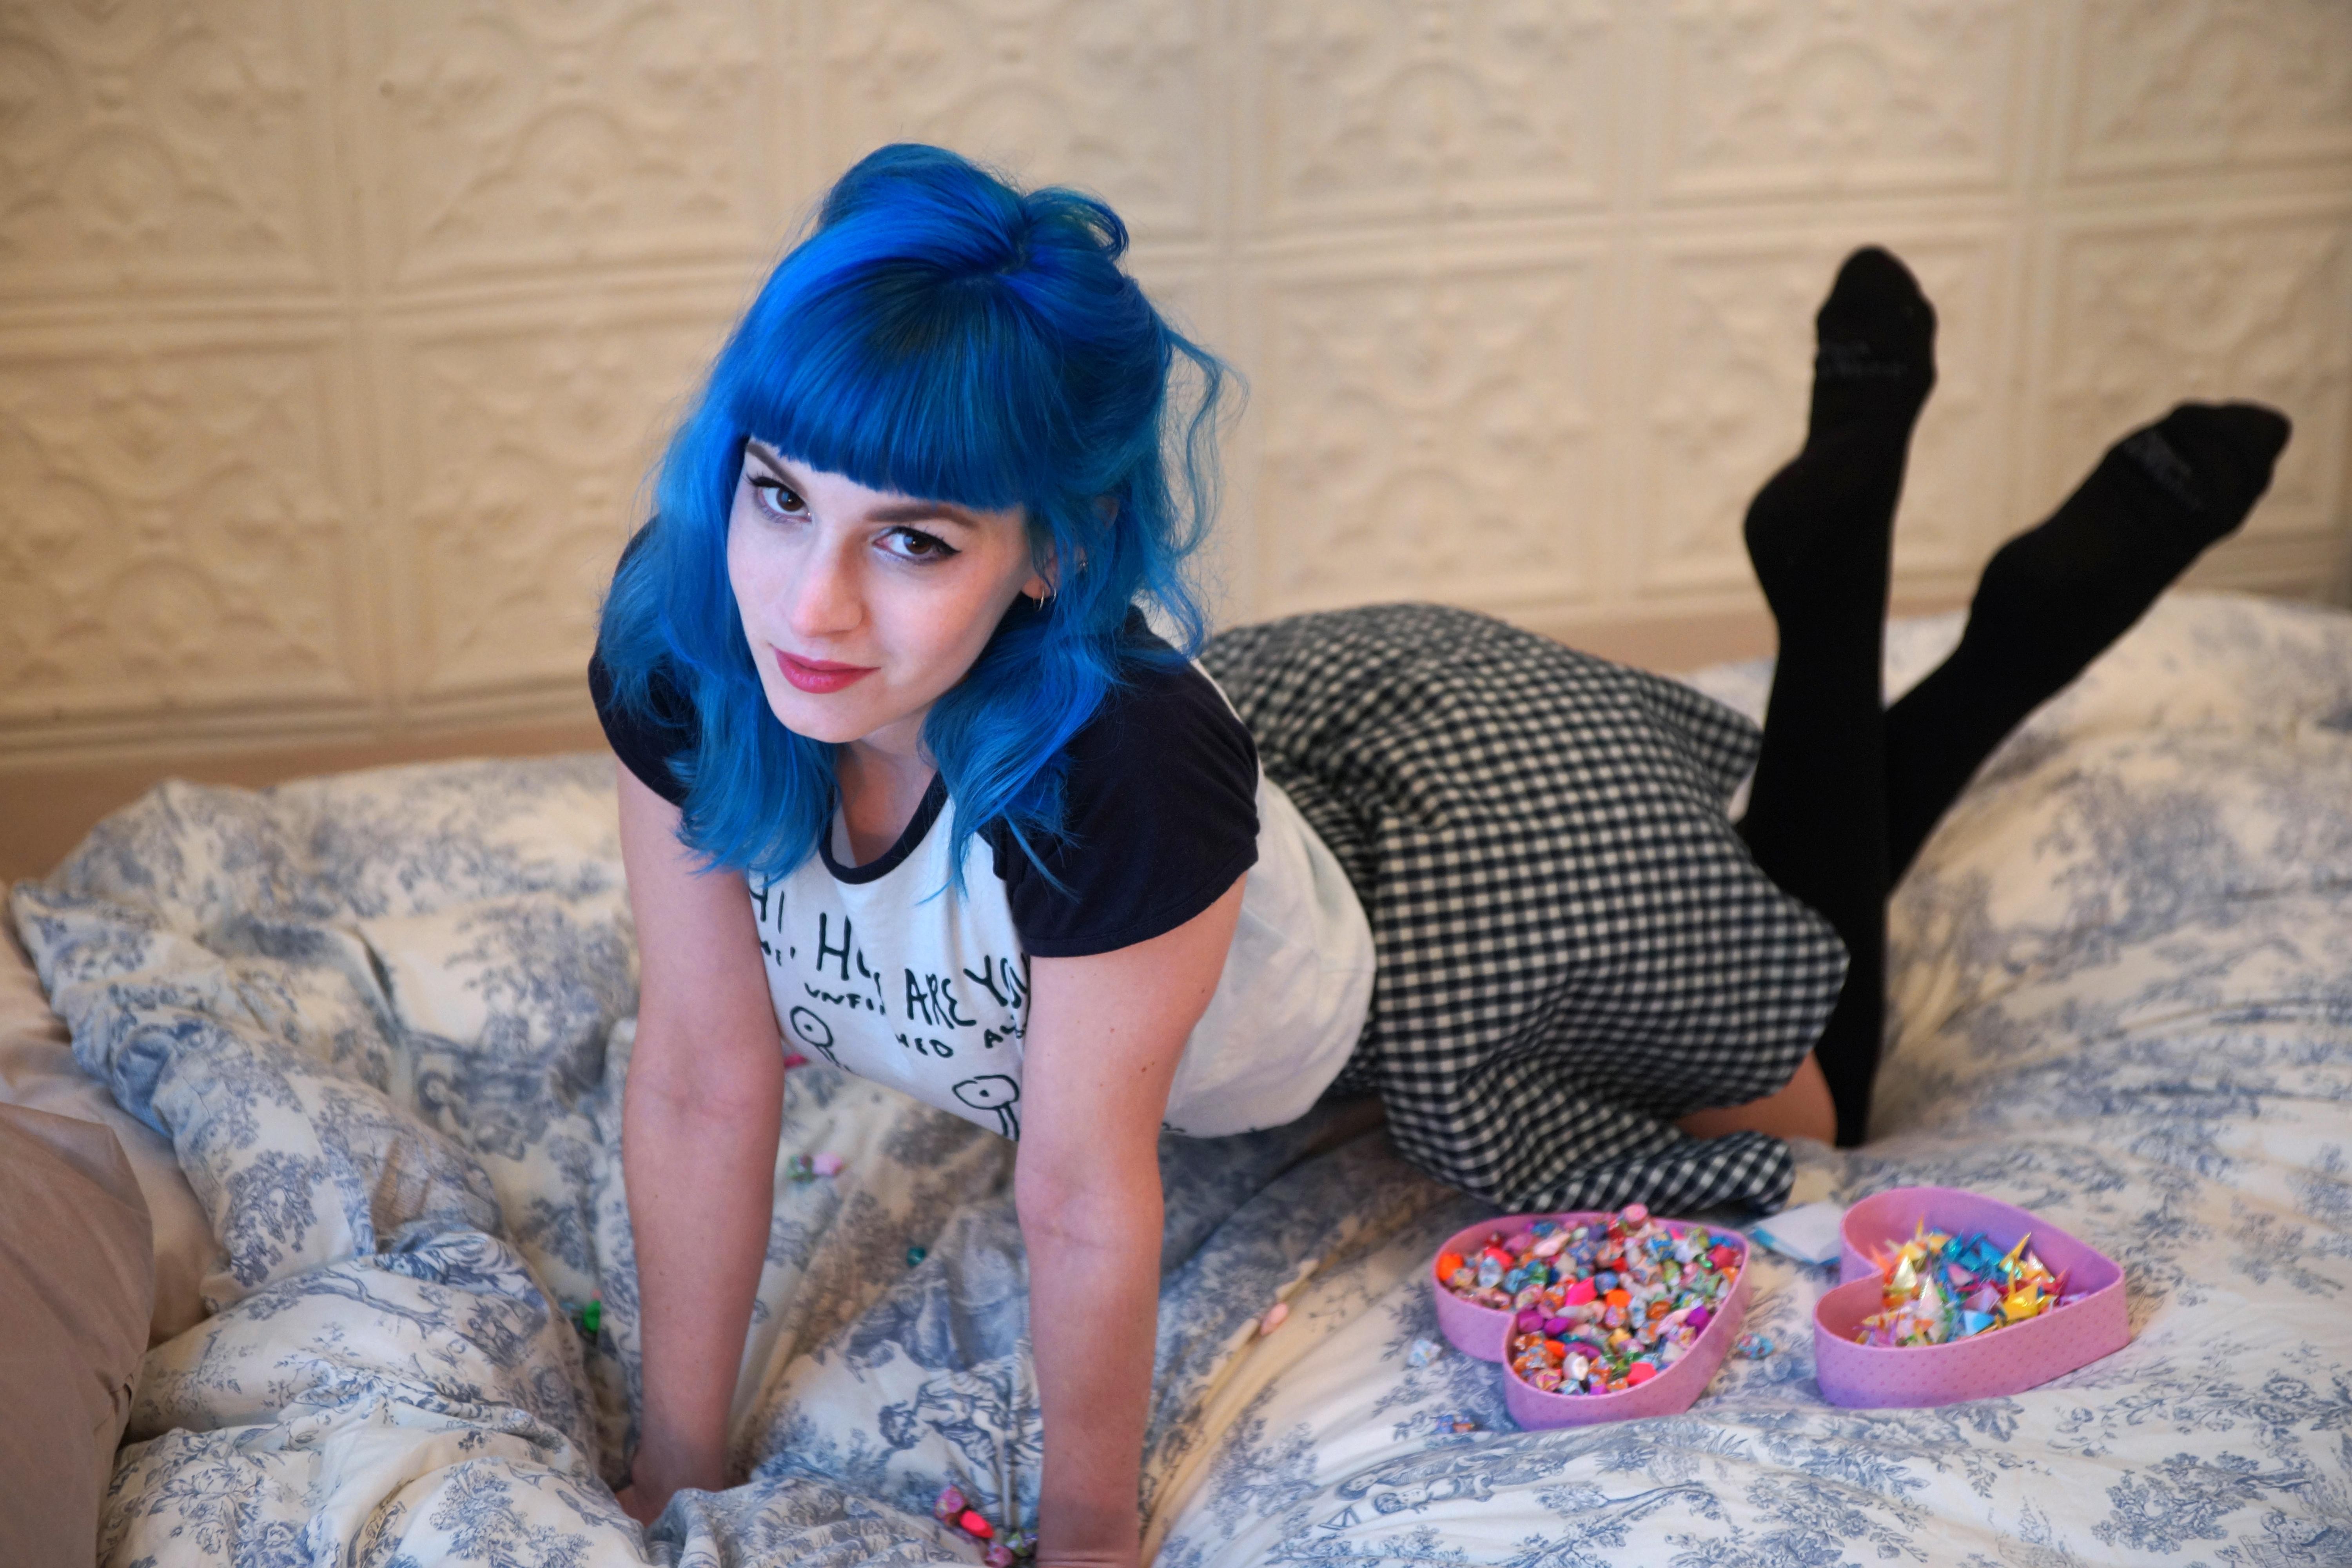 People 6000x4000 dyed hair blue Suicide Girls women in bed smiling blue hair model kneeling feet in the air black stockings bed lipstick looking at viewer women indoors heart (design)